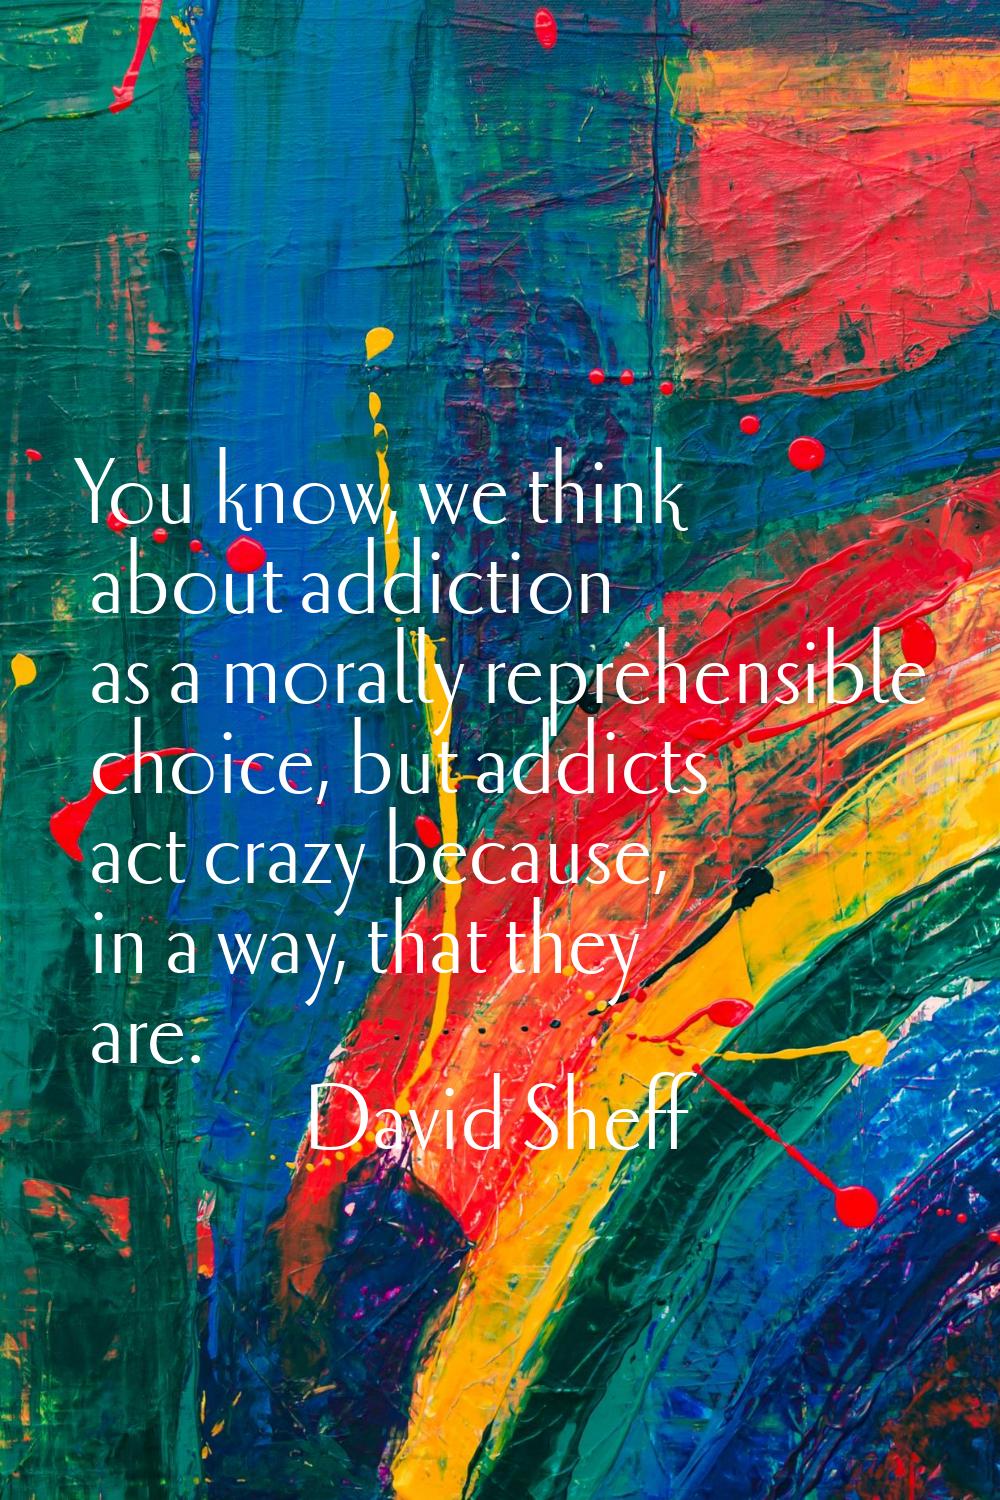 You know, we think about addiction as a morally reprehensible choice, but addicts act crazy because